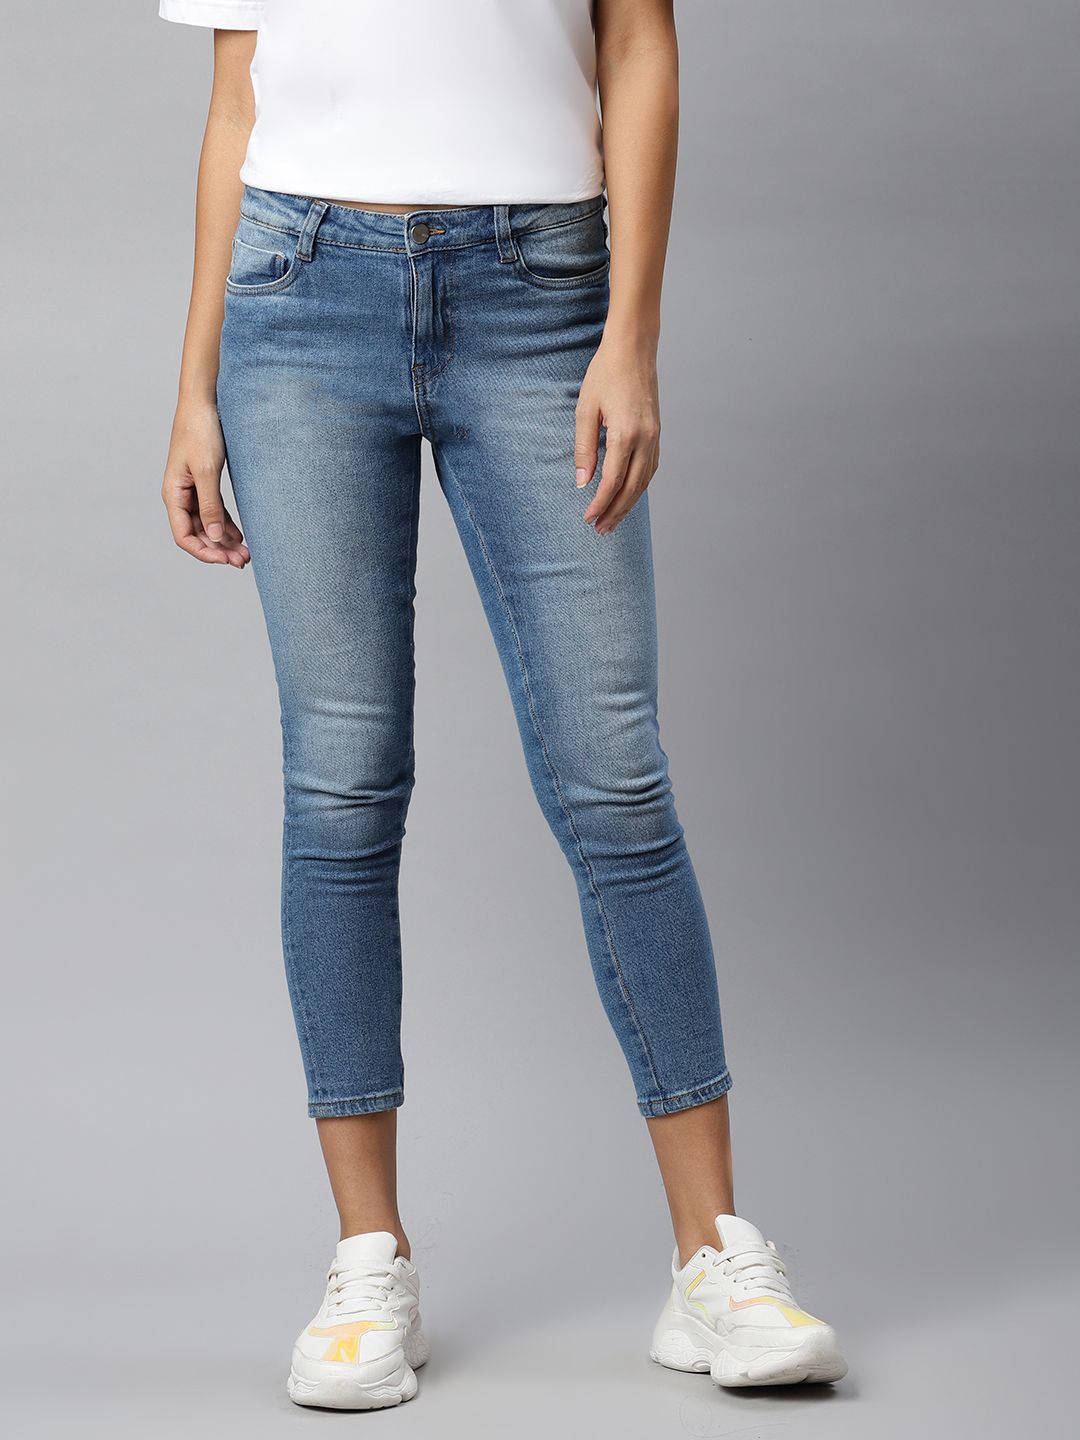 Mast & Harbour Women Blue Light Fade Stretchable Jeans Price in India